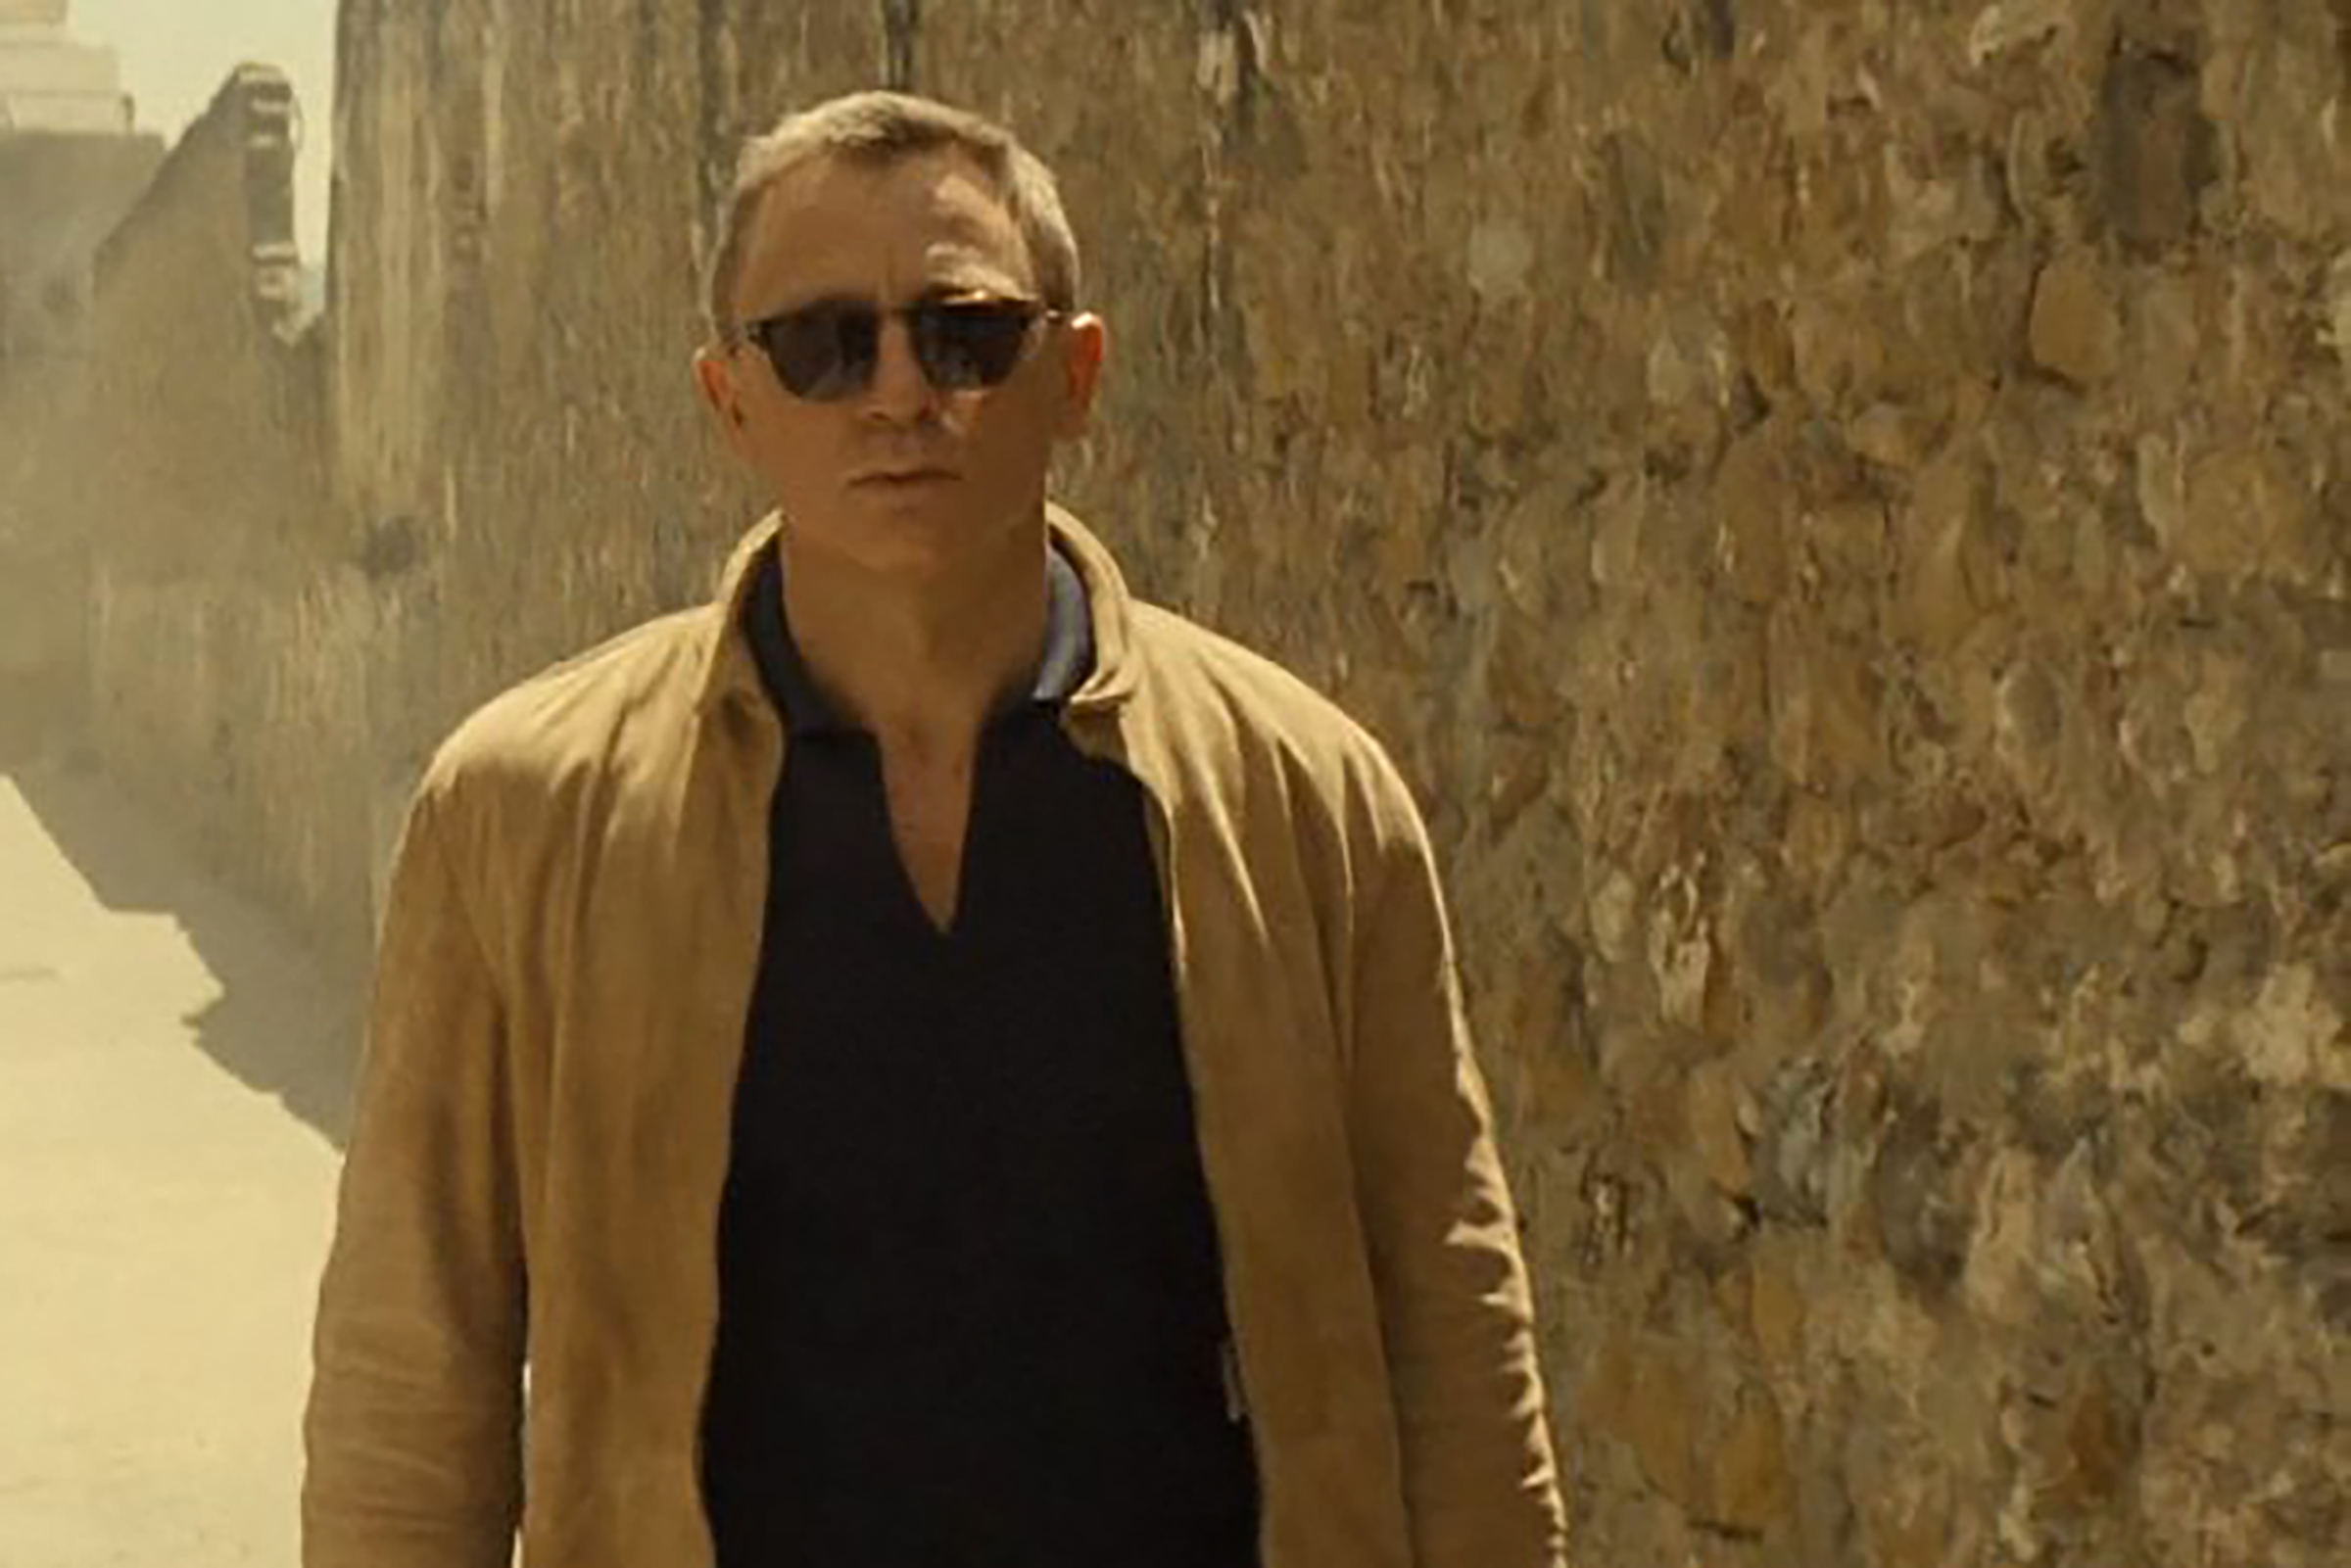 Daniel Craig rocks a tan suede jacket from Matchless in Spectre.